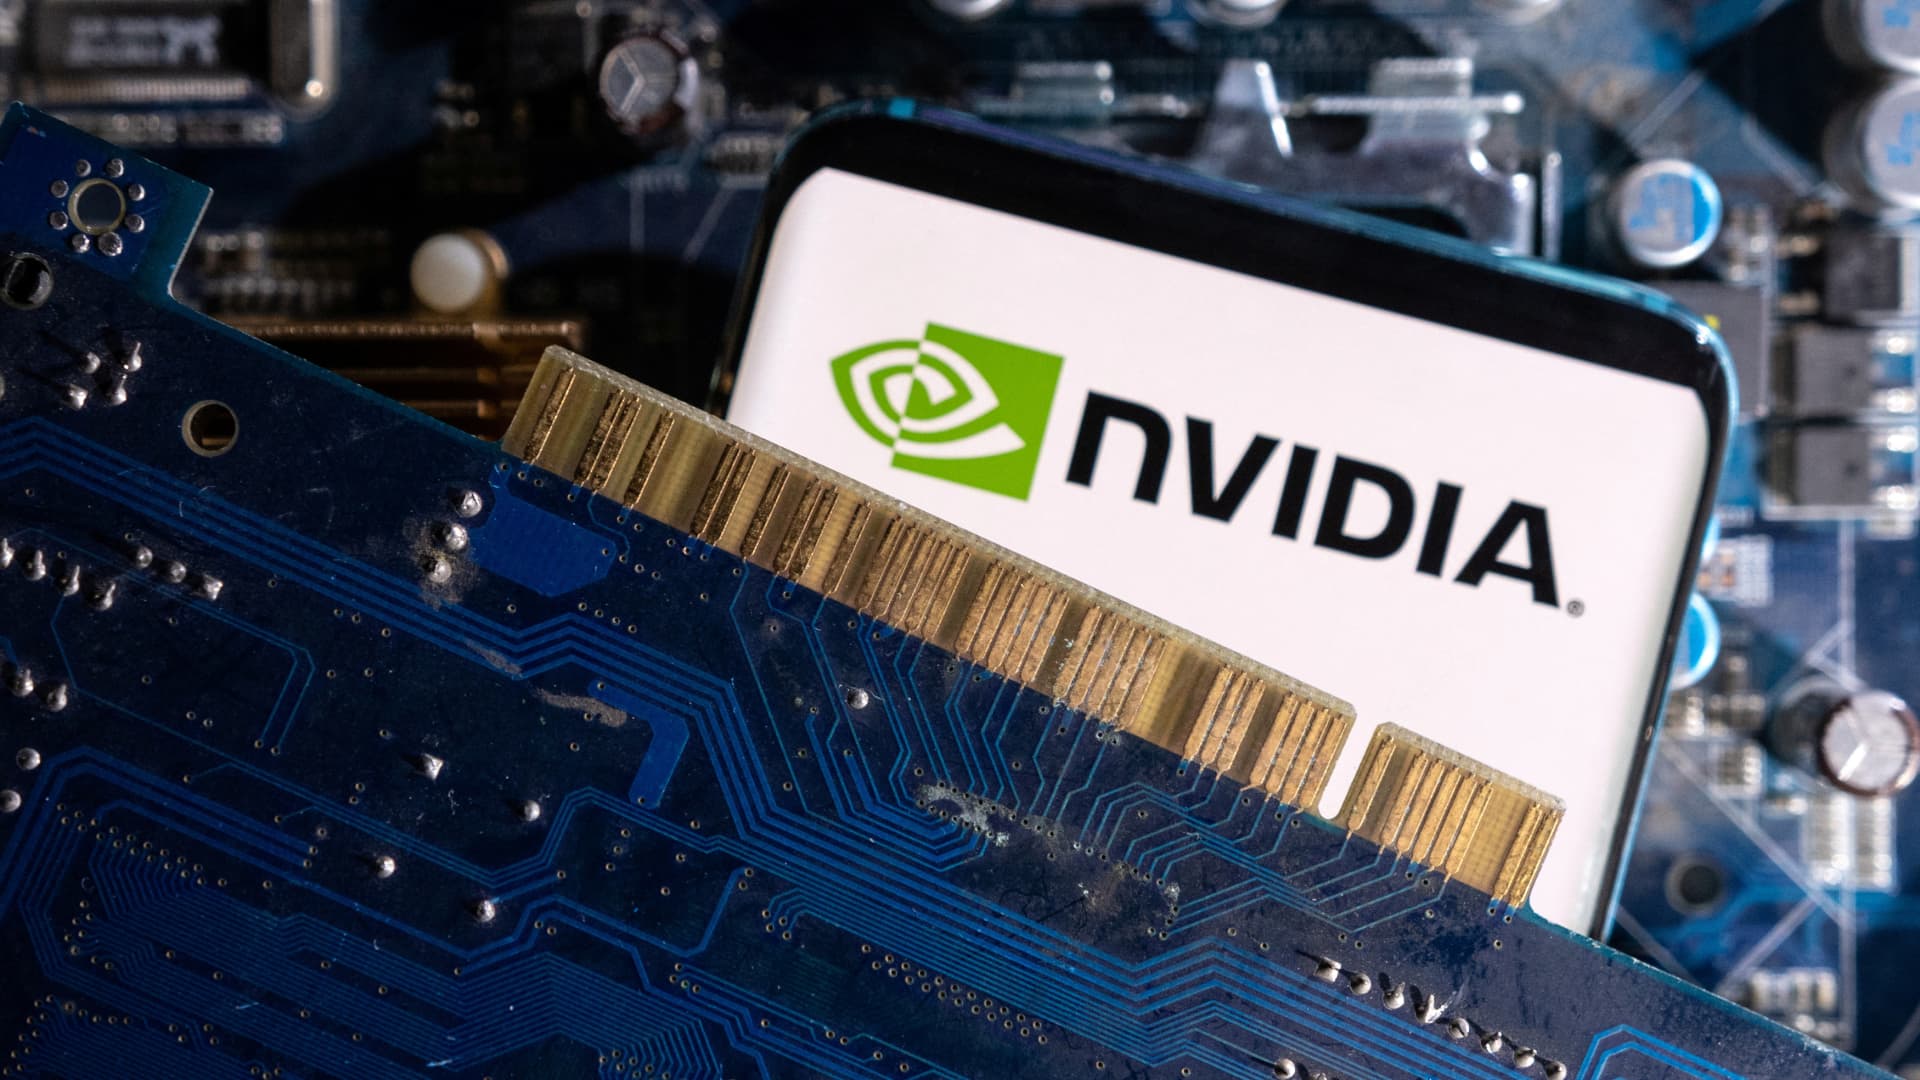 Stocks making the biggest moves midday Nvidia, Marvell Technology